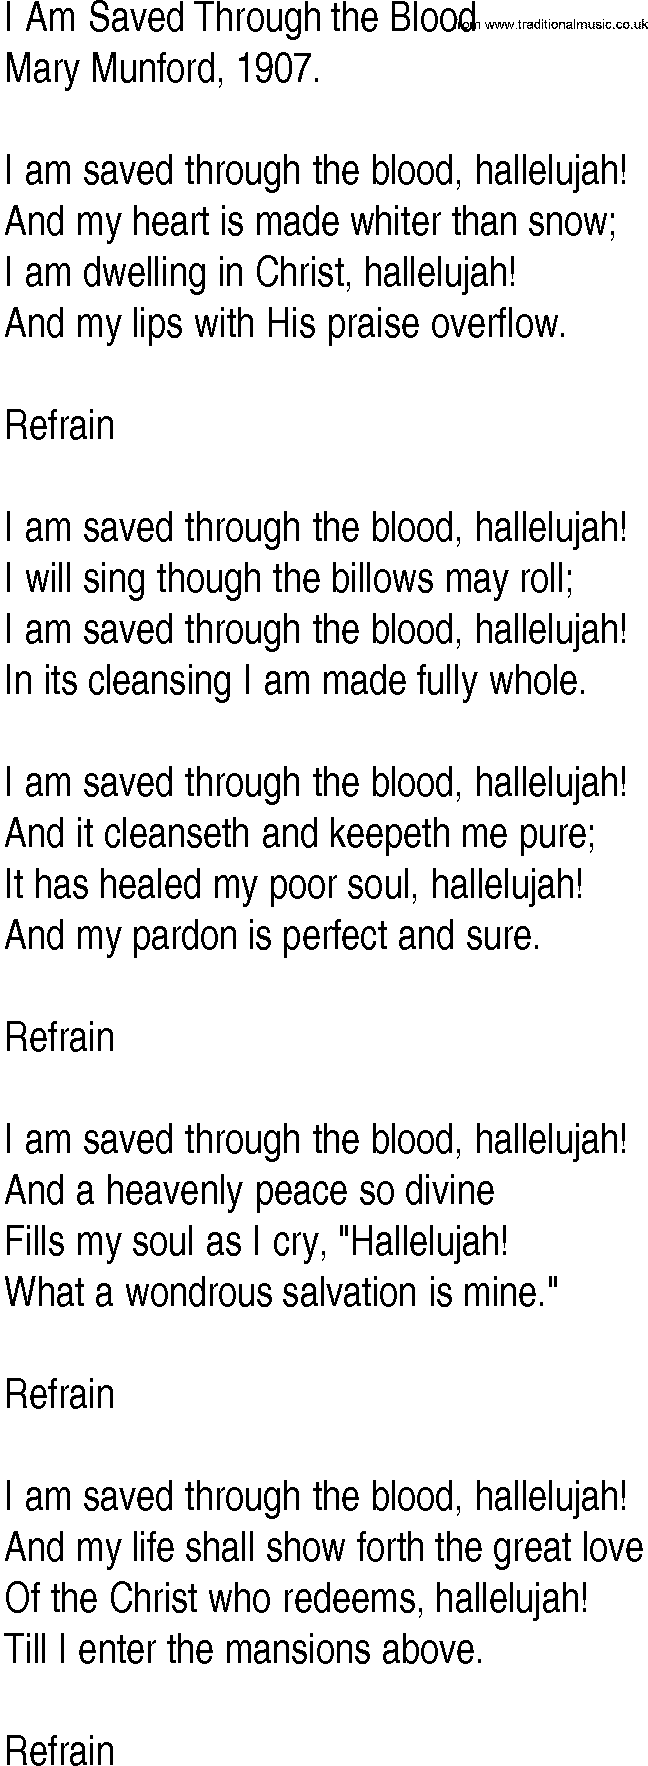 Hymn and Gospel Song: I Am Saved Through the Blood by Mary Munford lyrics